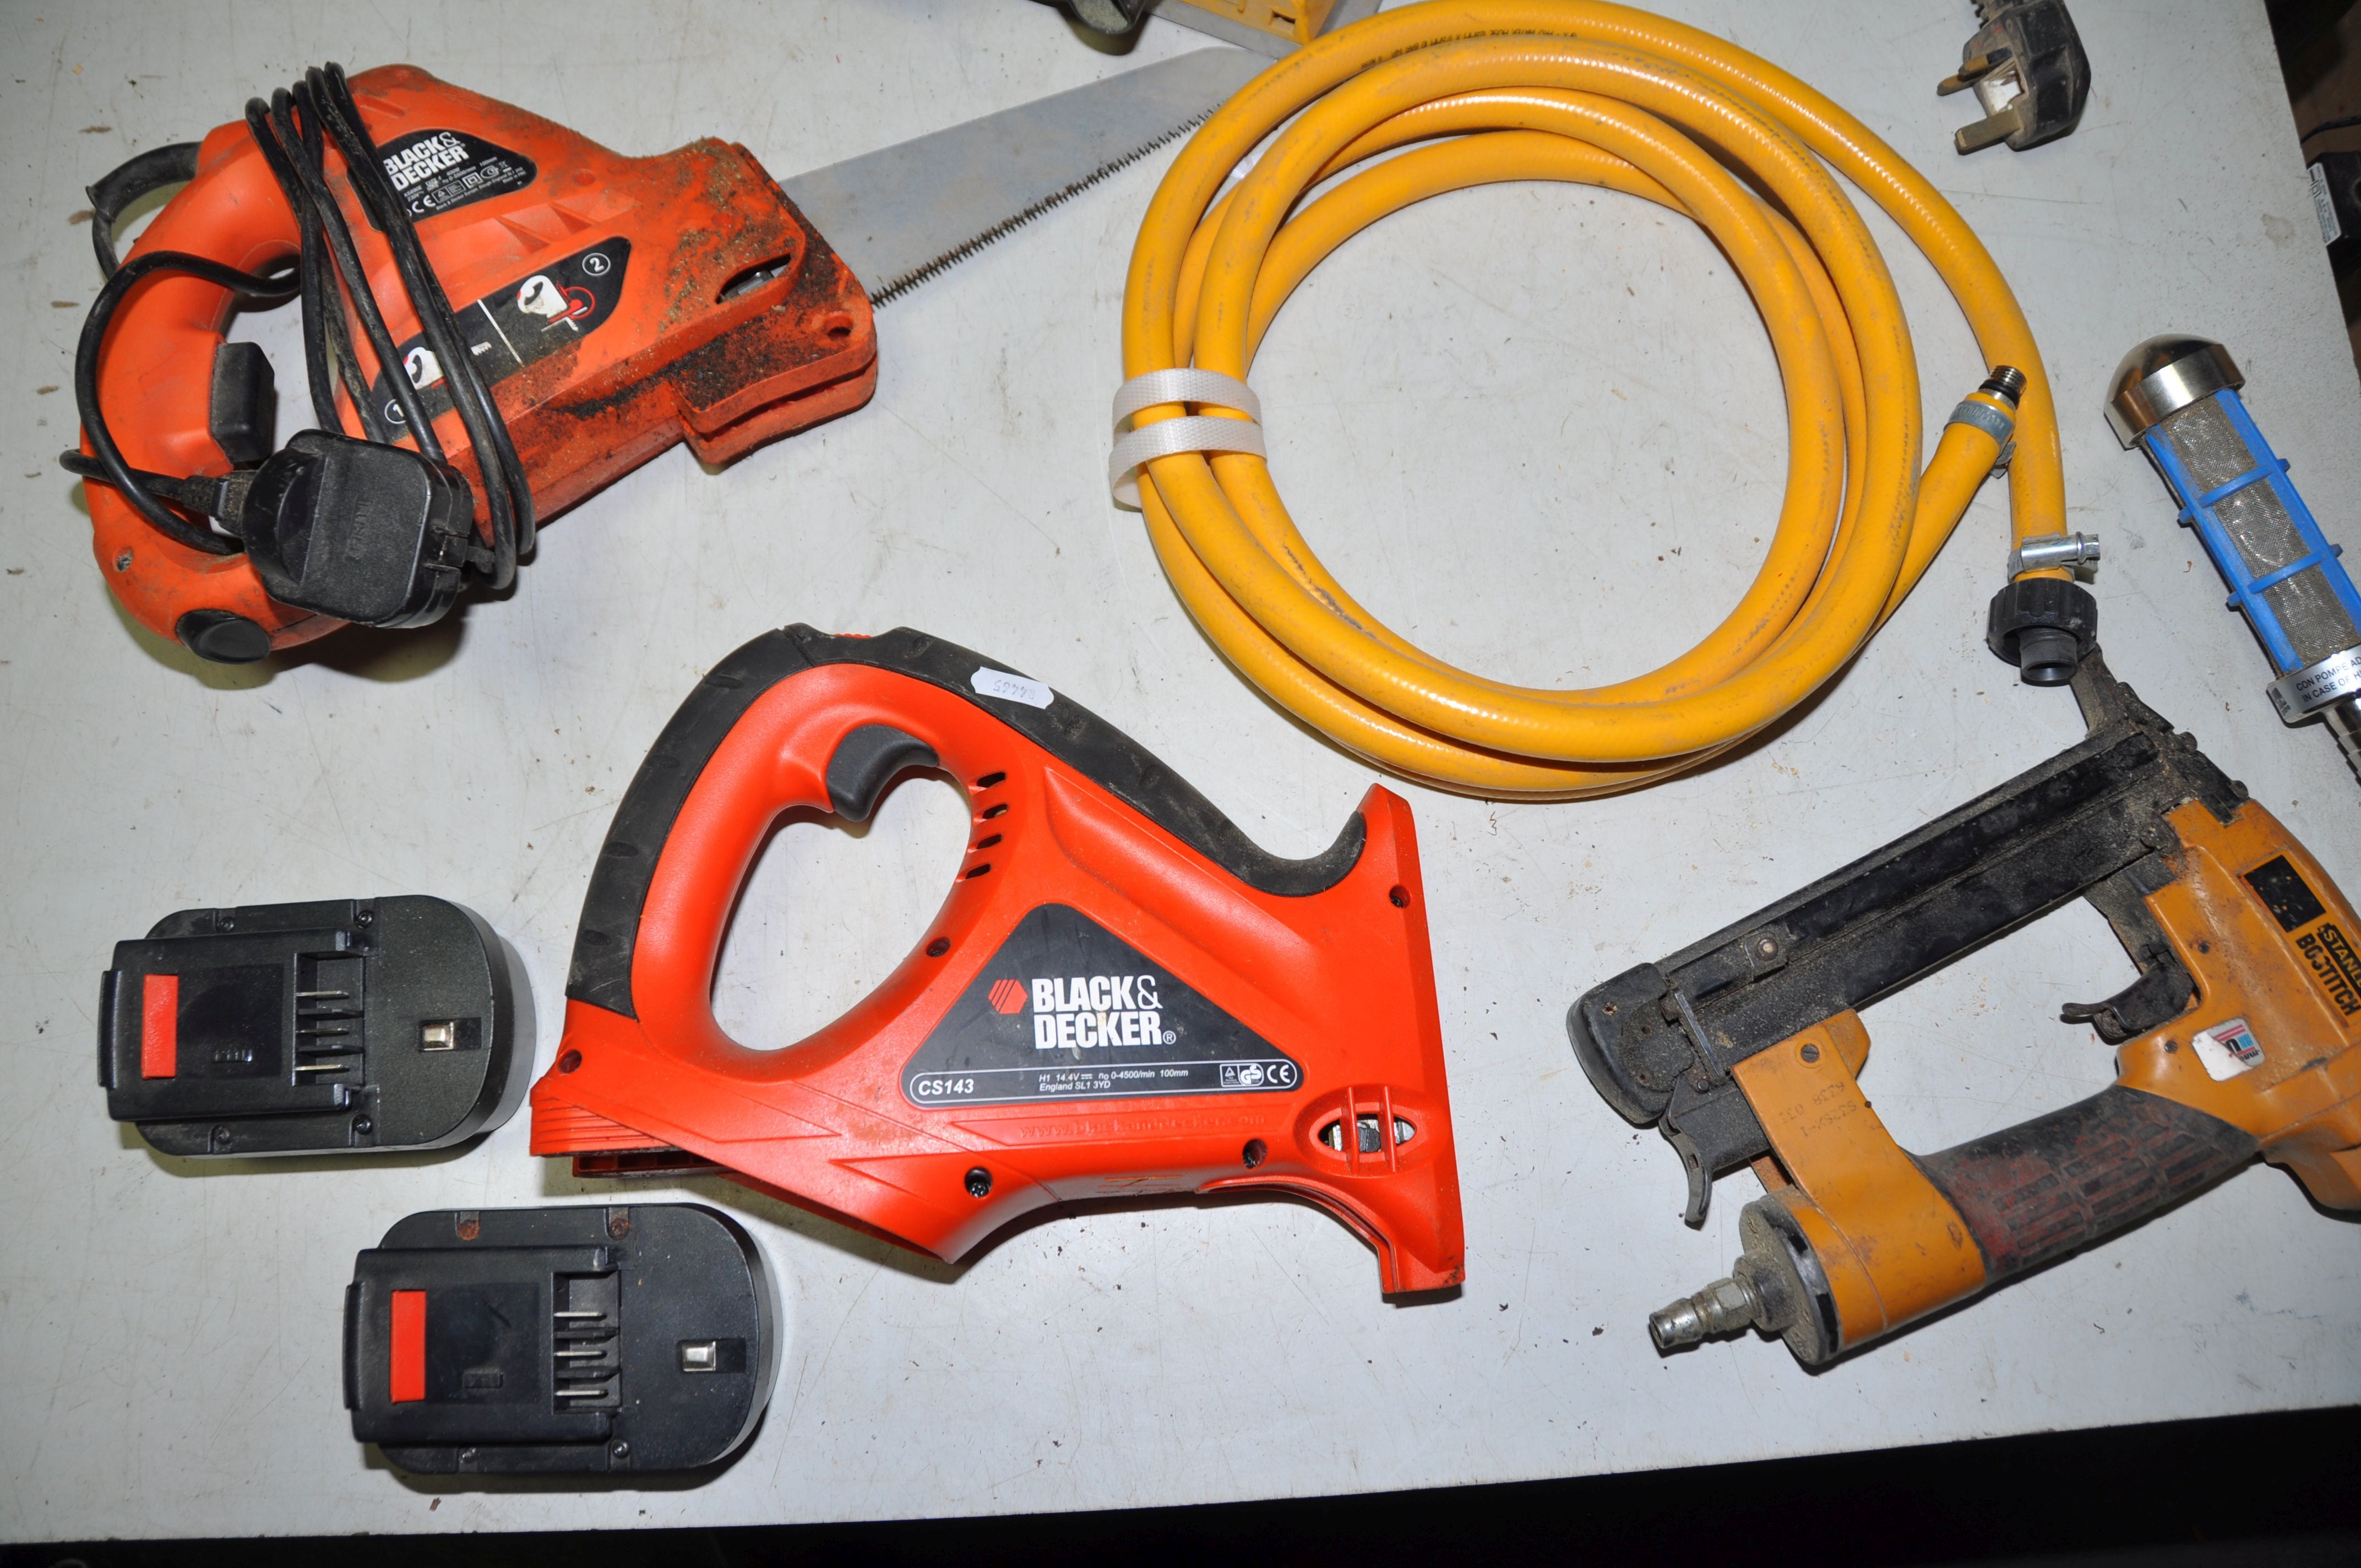 A SELECTION OF POWERTOOLS to include a Dewalt DW321 jigsaw, Black and Decker KS890E scorpion - Image 3 of 3